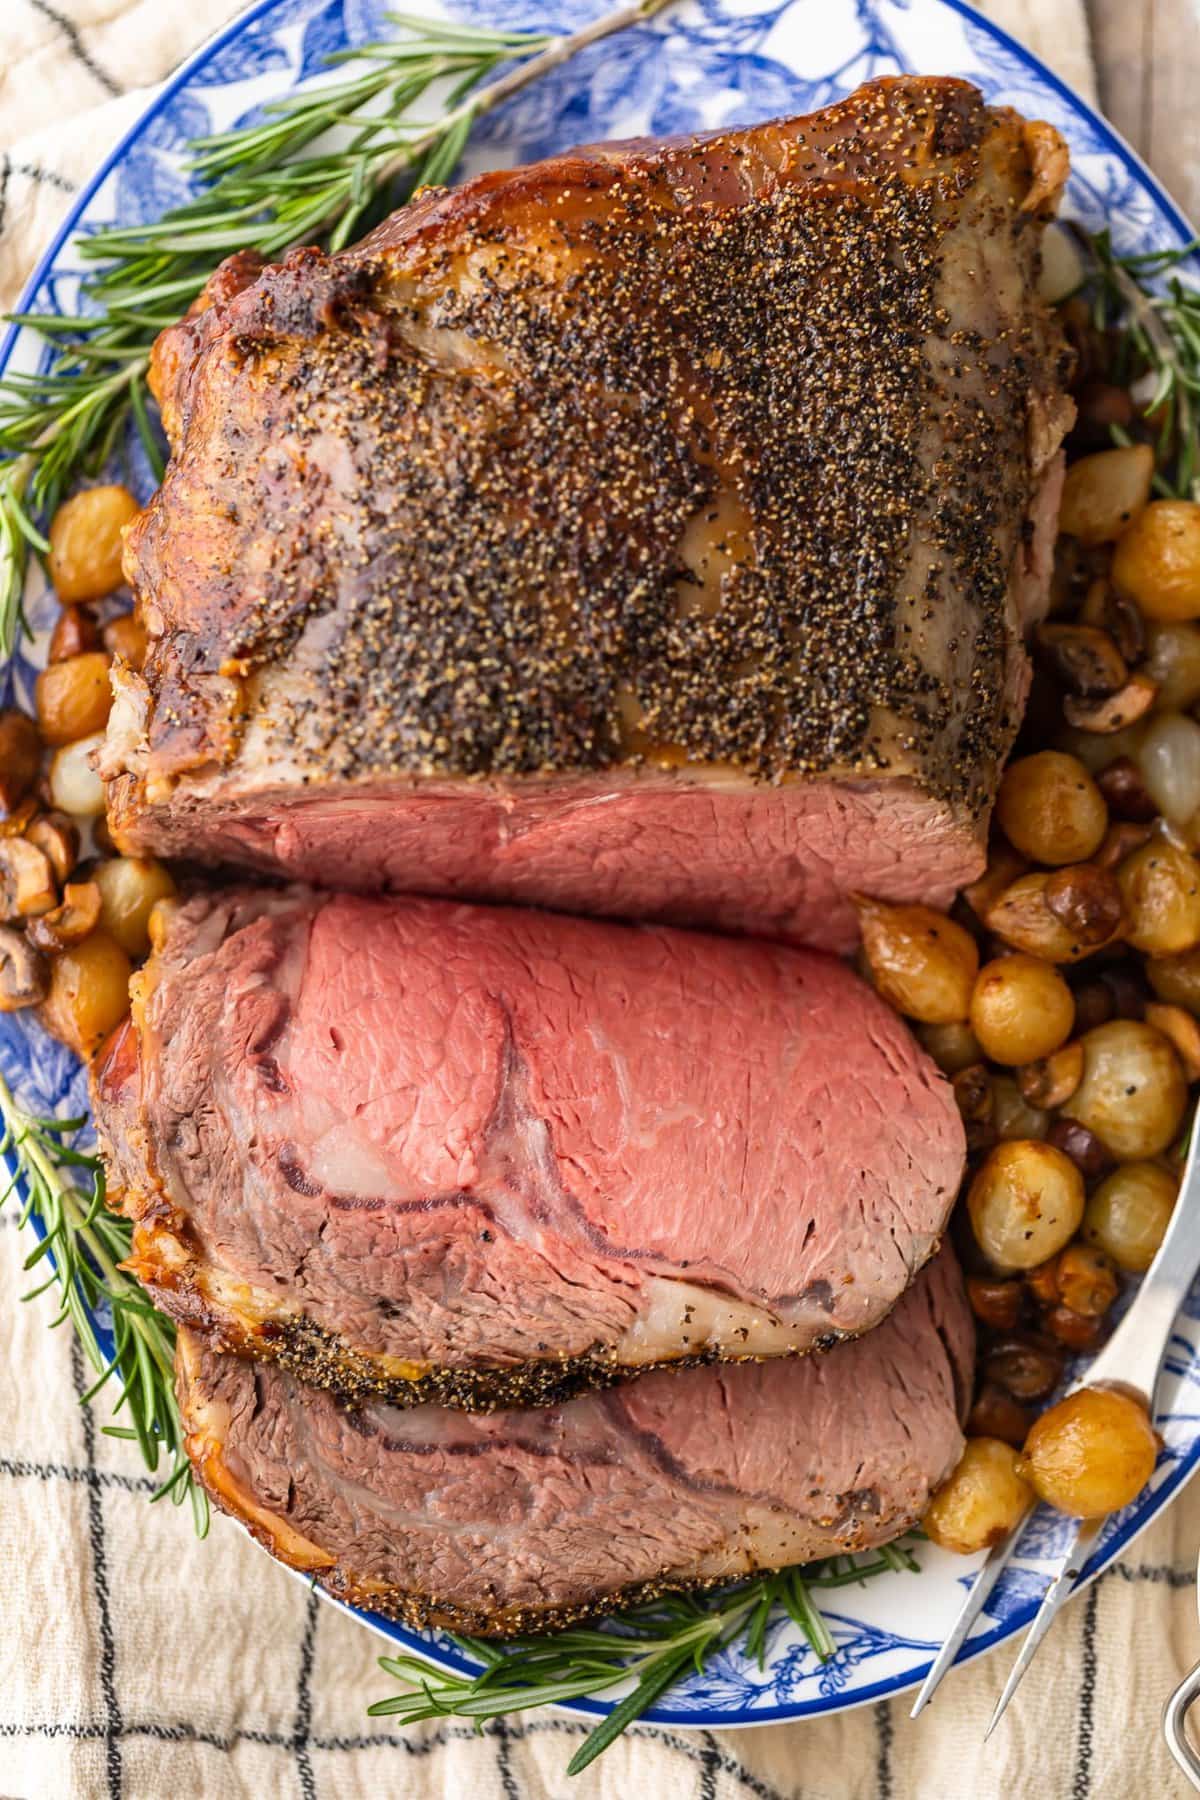 Best Prime Rib Roast Recipe {How to Cook Prime Rib in the Oven}